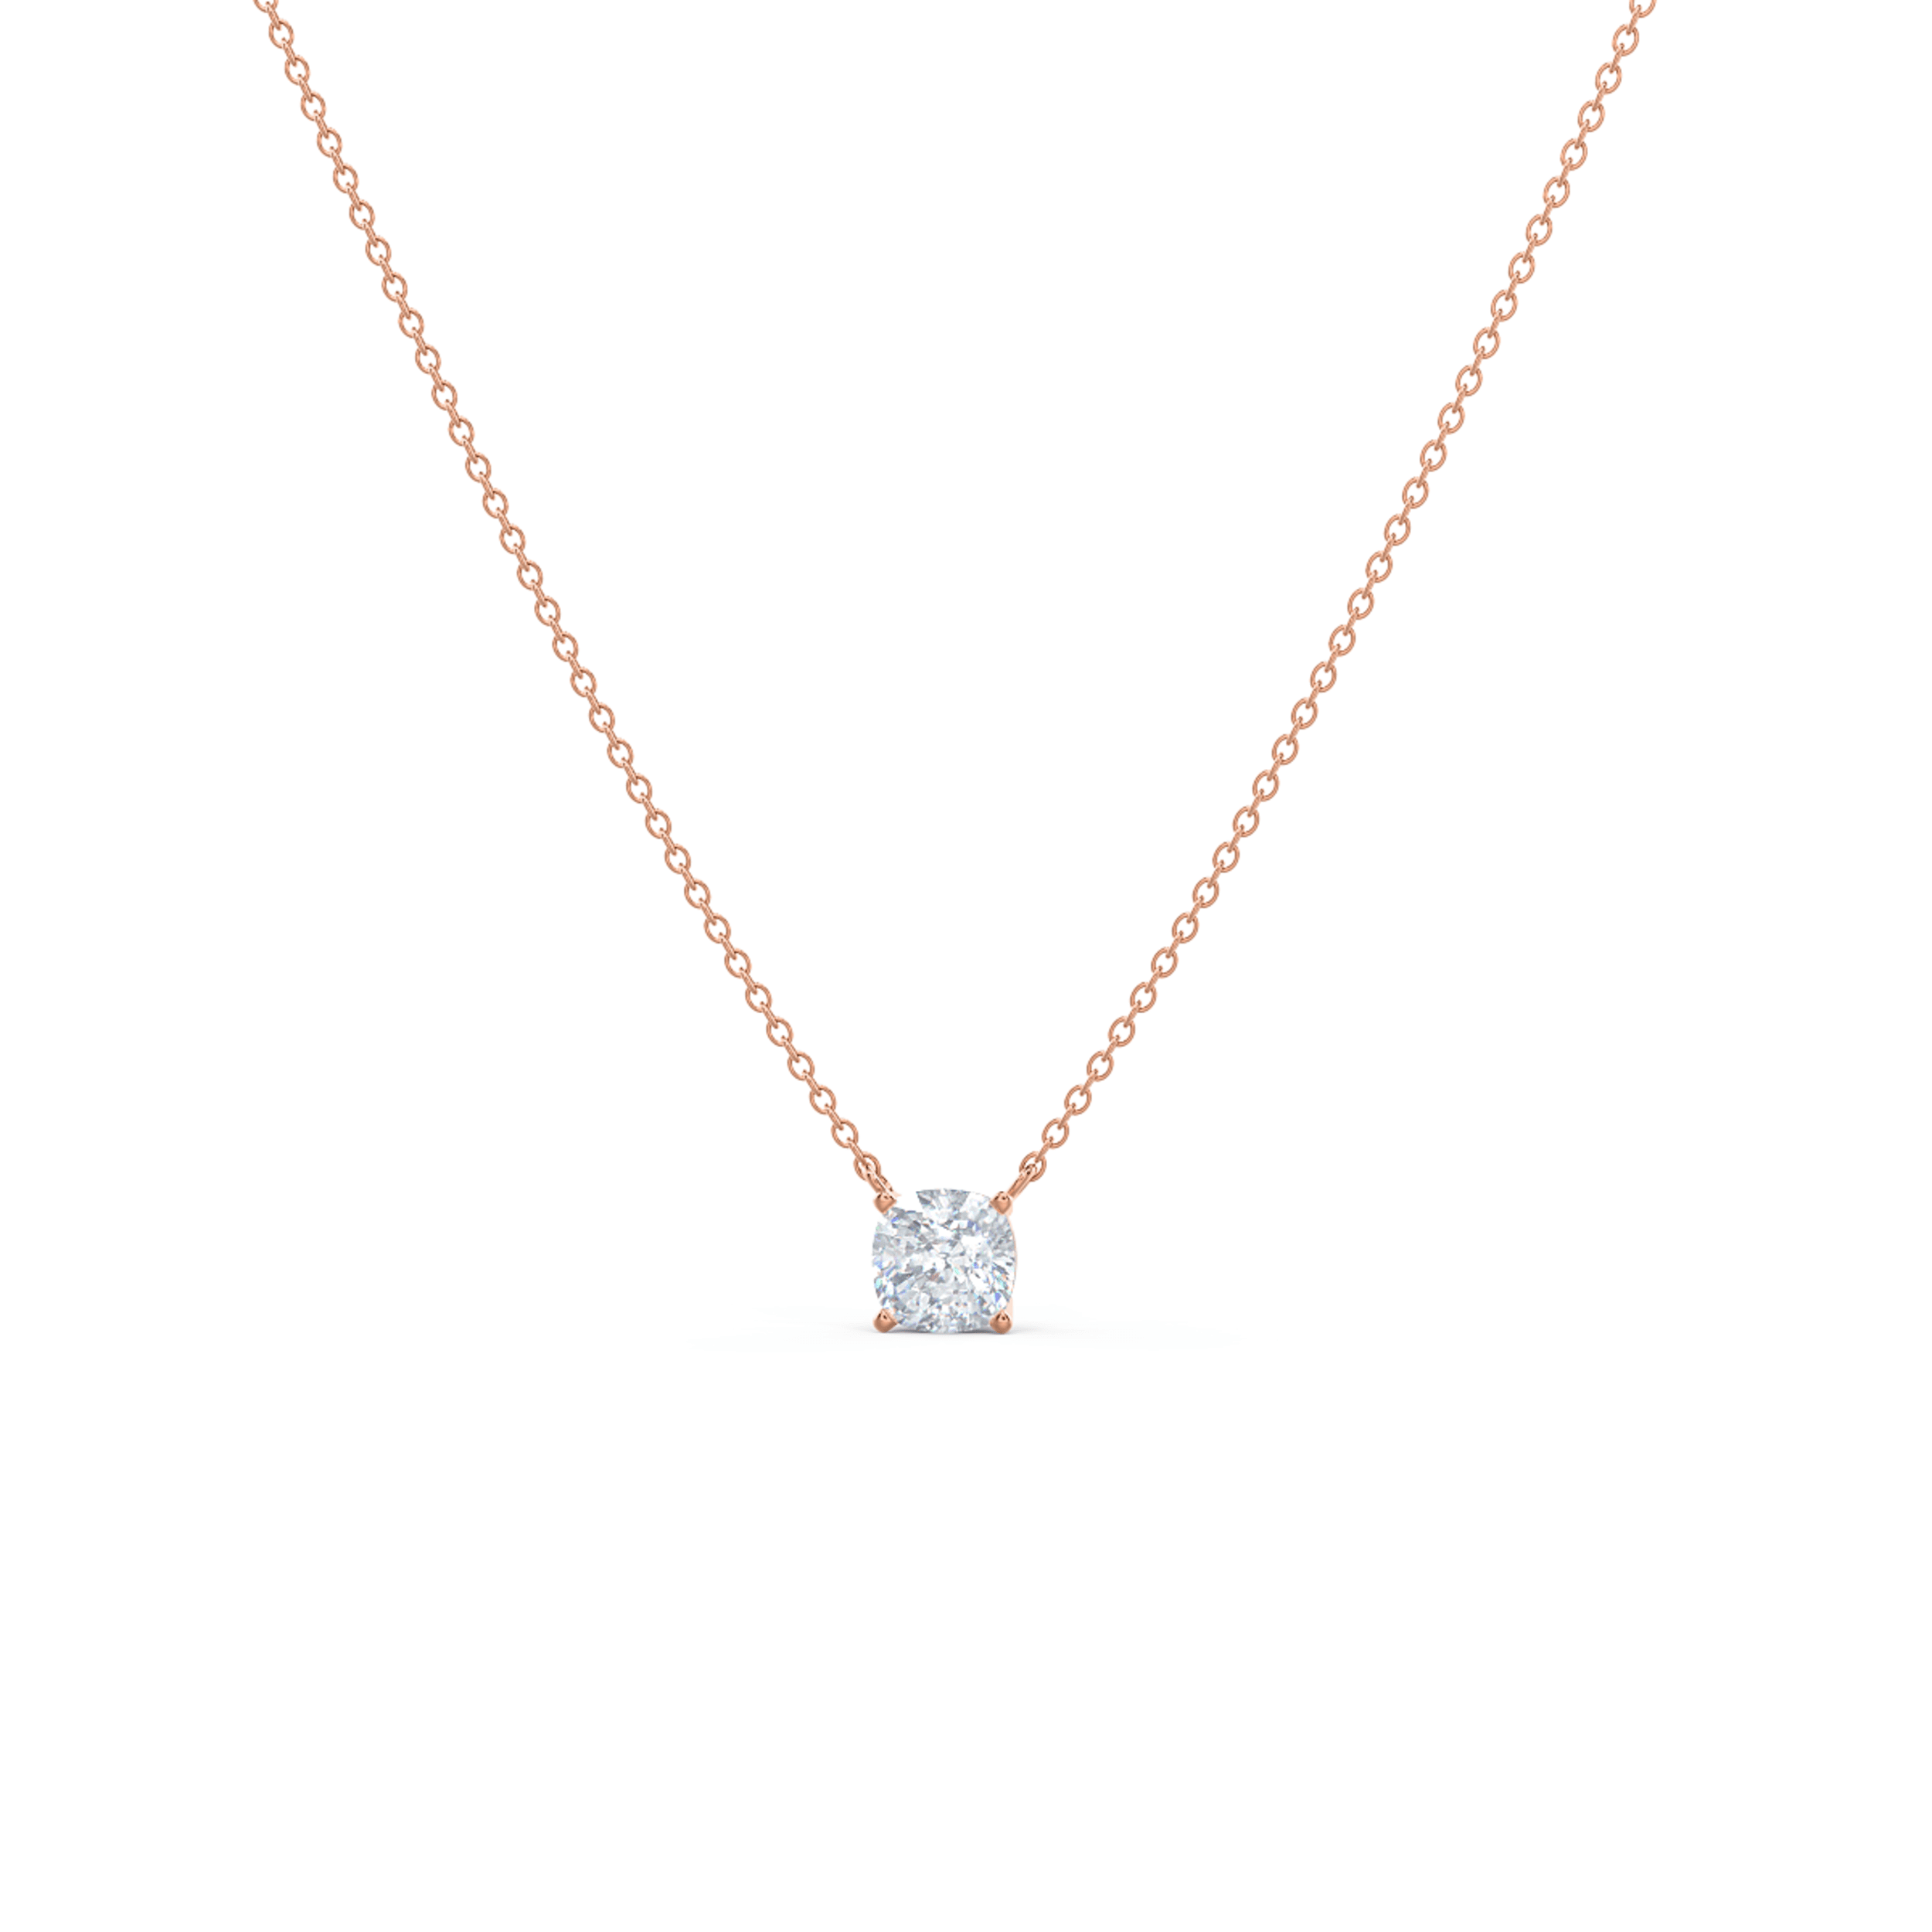 14k Rose Gold Floating Cushion Pendant featuring High Quality 1.0 ctw Diamonds